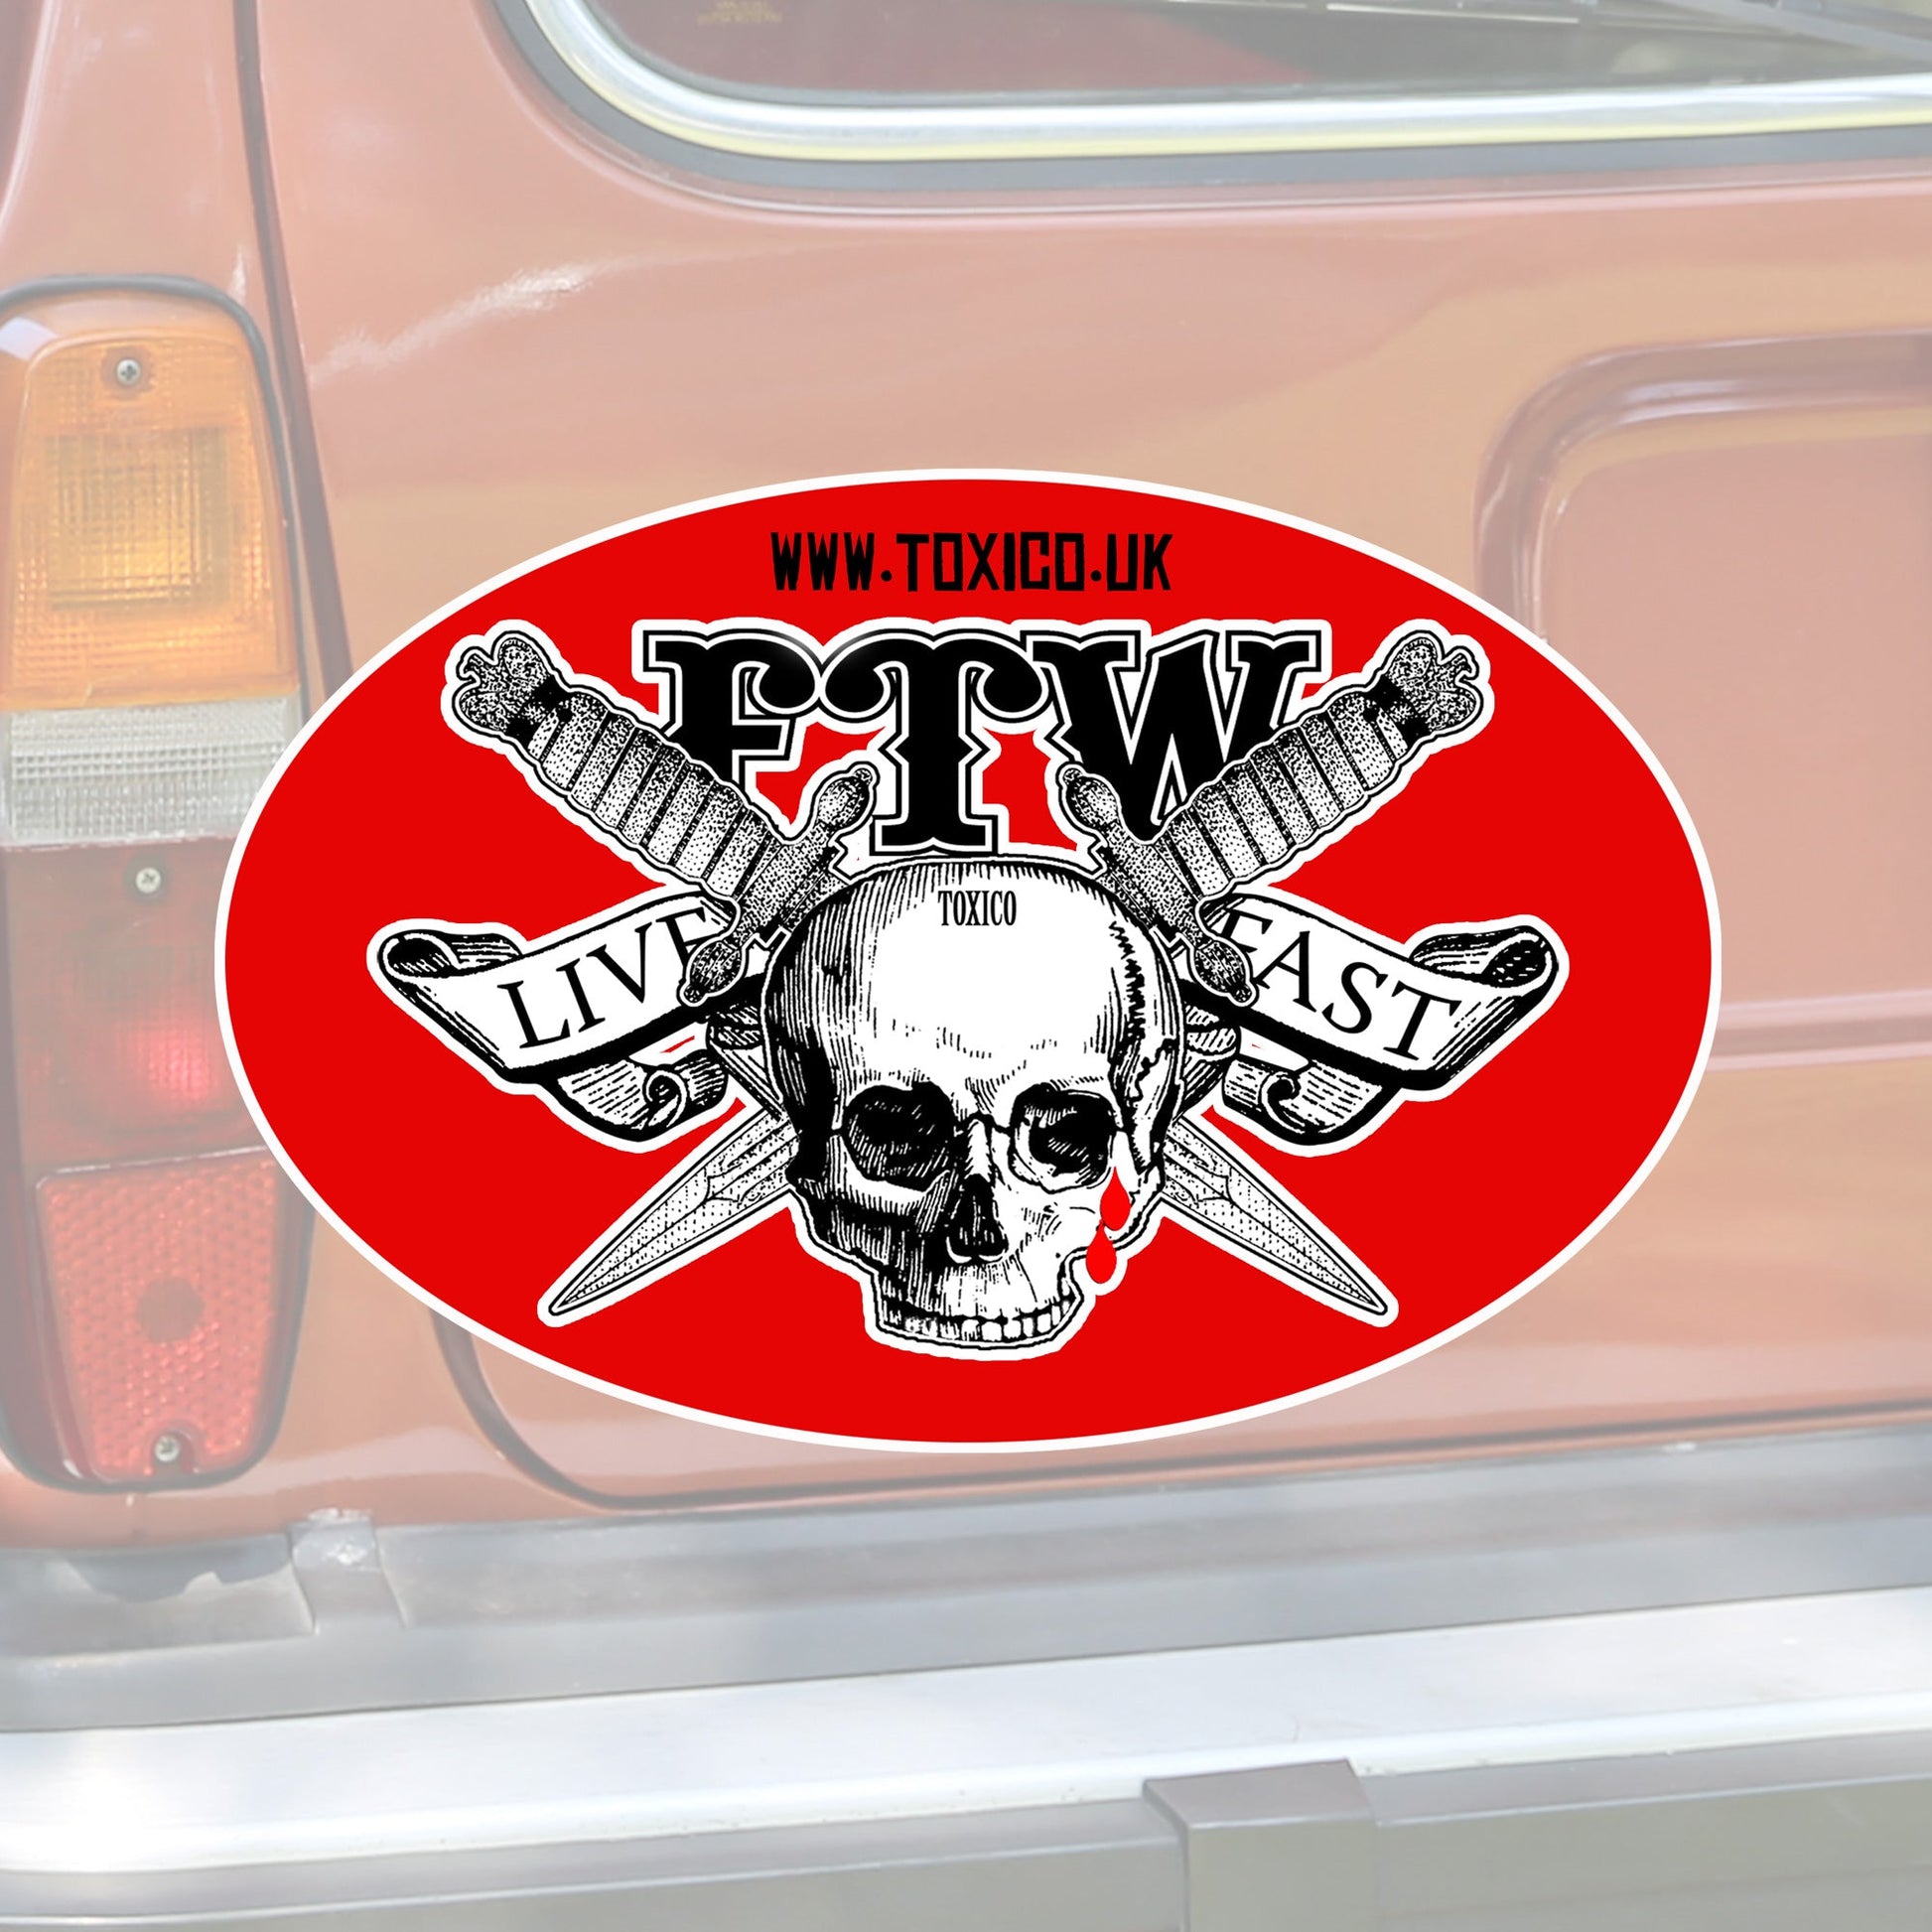 FTW Sticker - Toxico Clothing